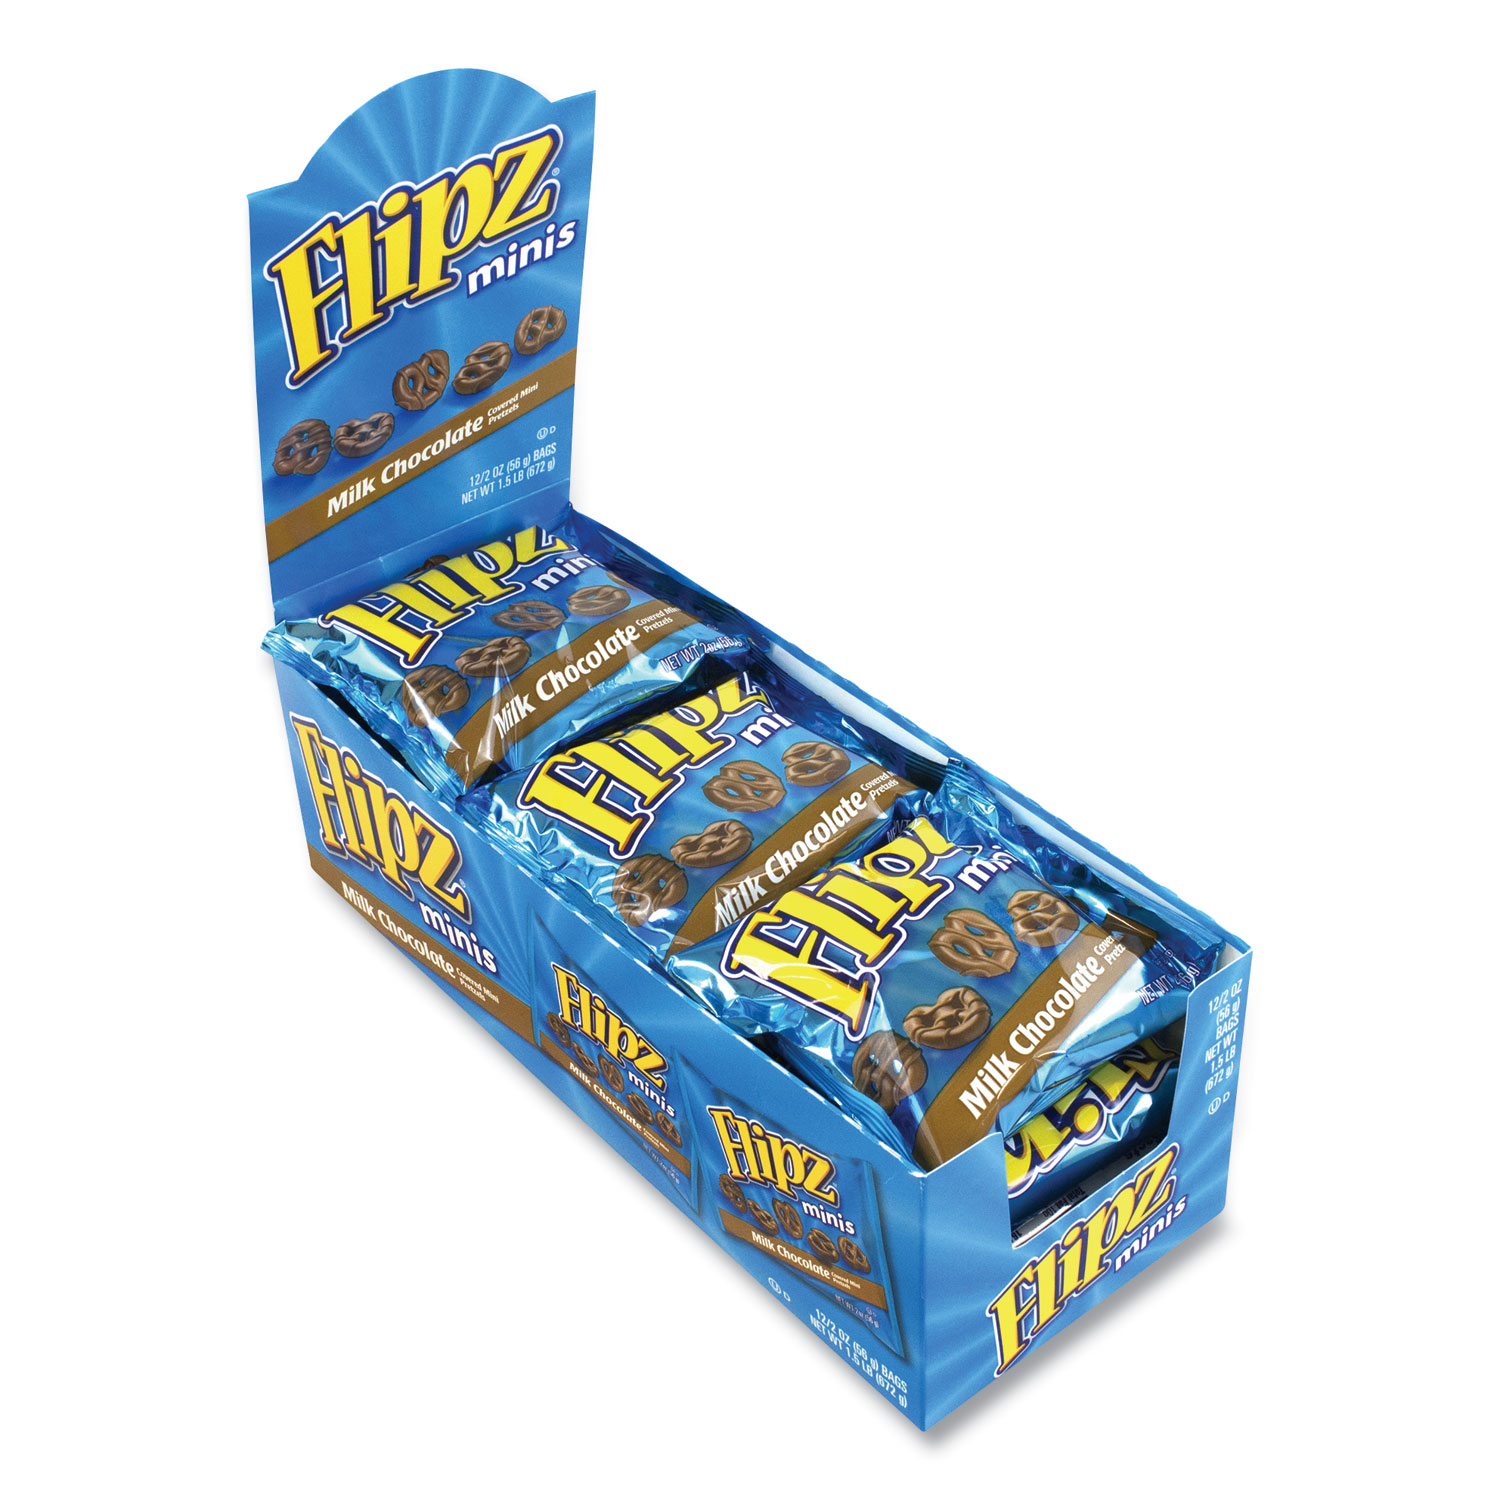  Flipz 34 Minis Milk Chocolate Covered Pretzels with Display Box, 2 oz Pouch, 12 Pouches/Box, Free Delivery in 1-4 Business Days (GRR25200002) 